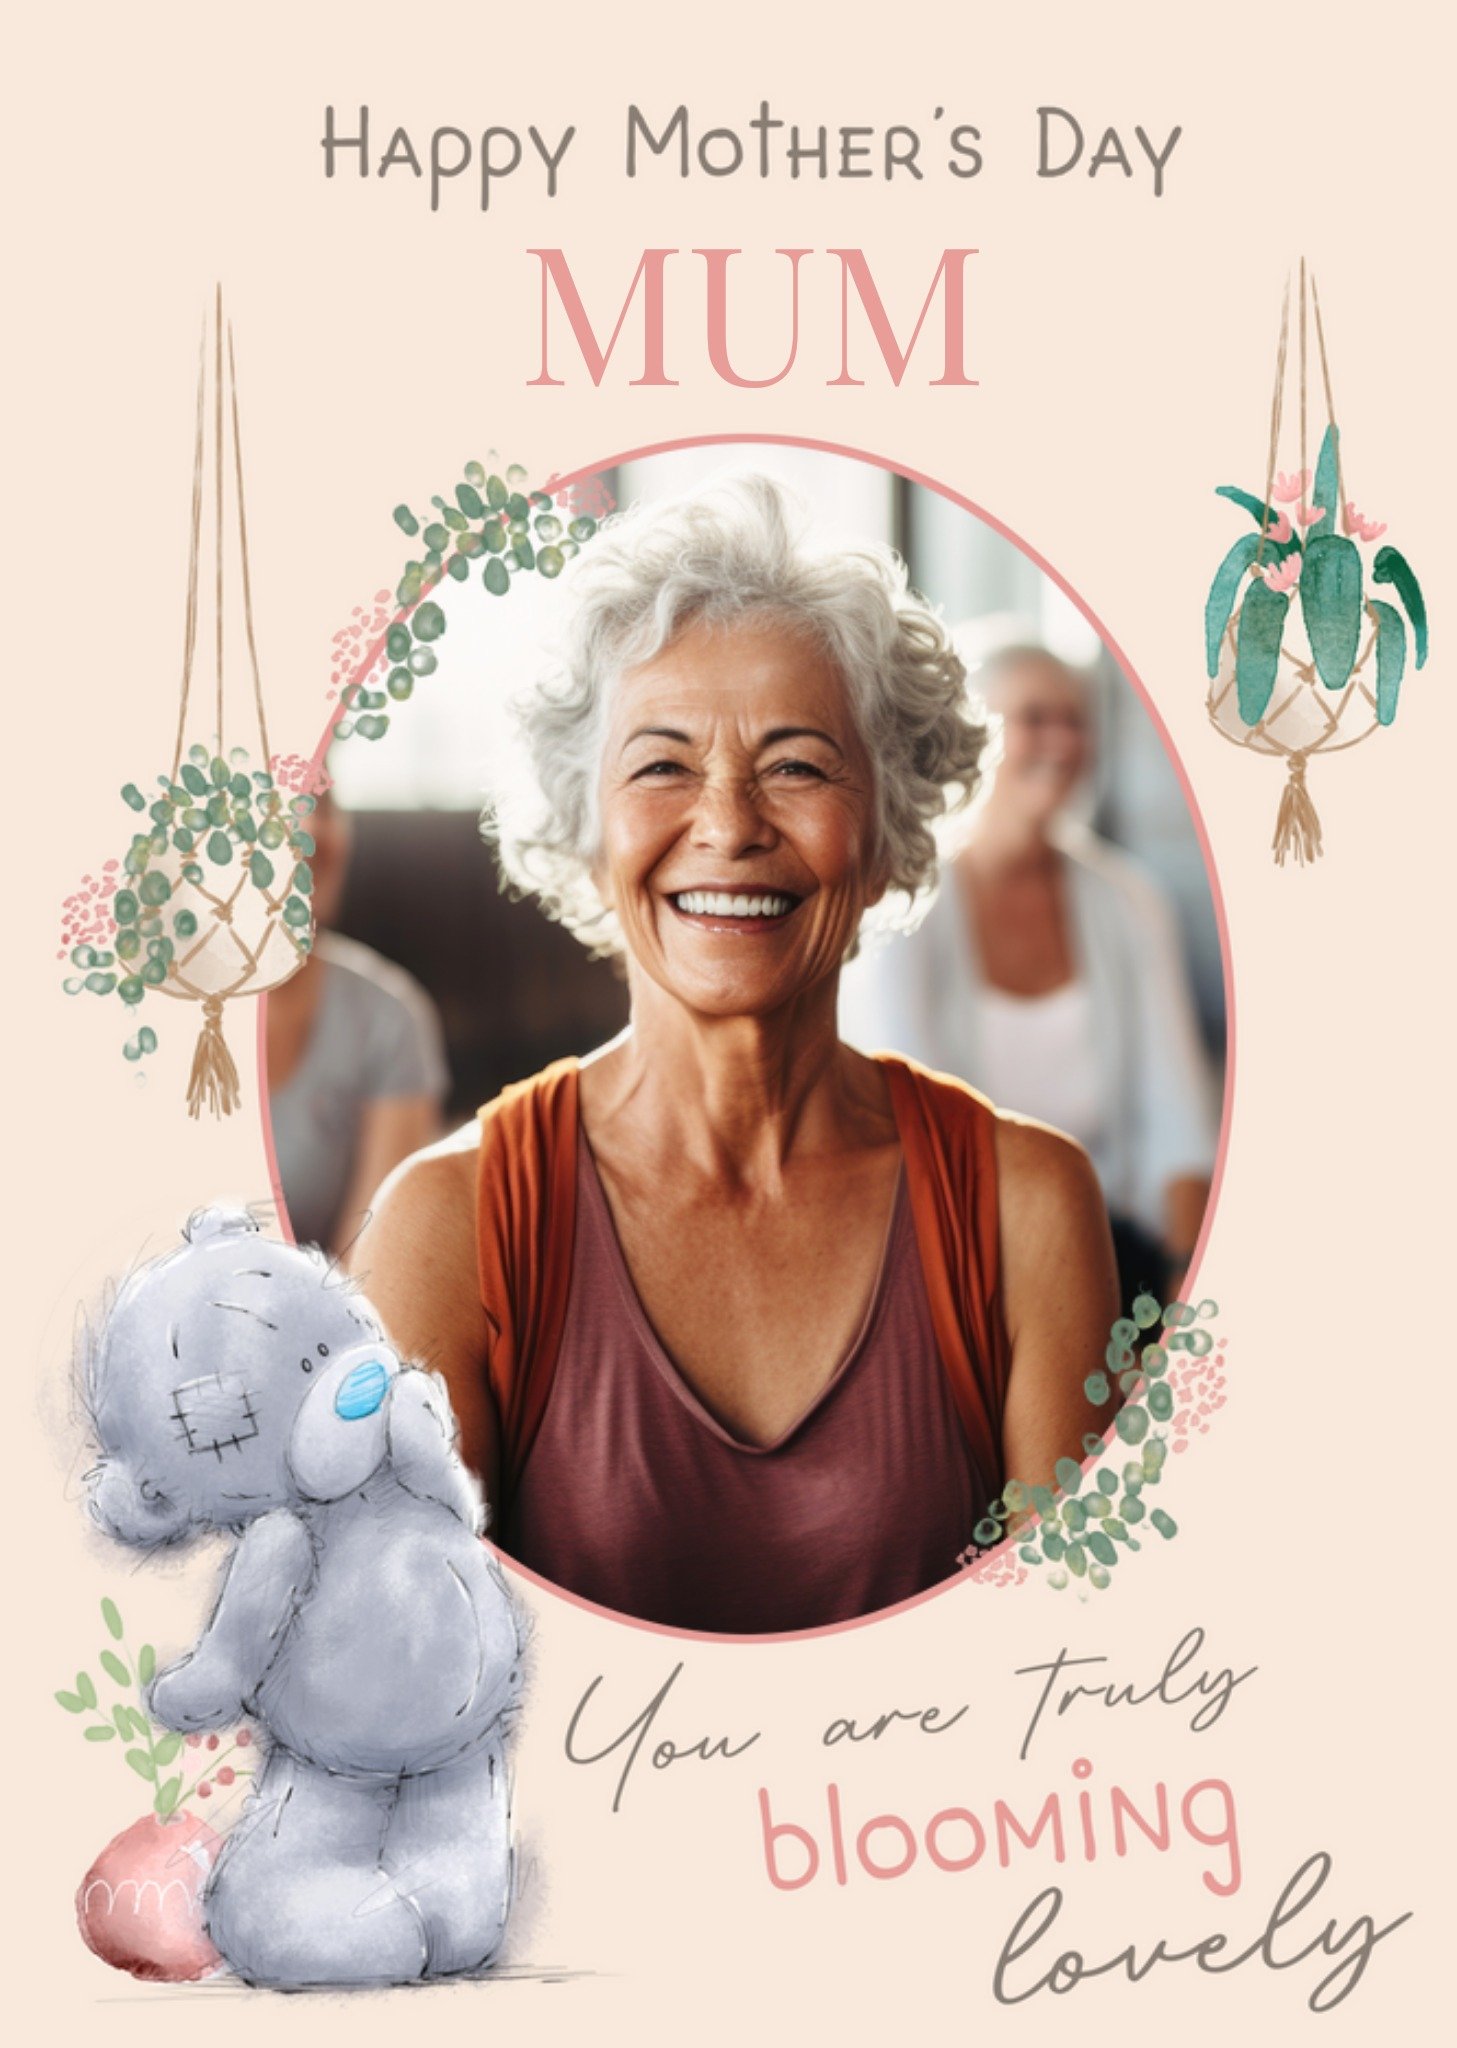 Me To You Tatty Teddy Truly Blooming Photo Upload Mother's Day Card, Large